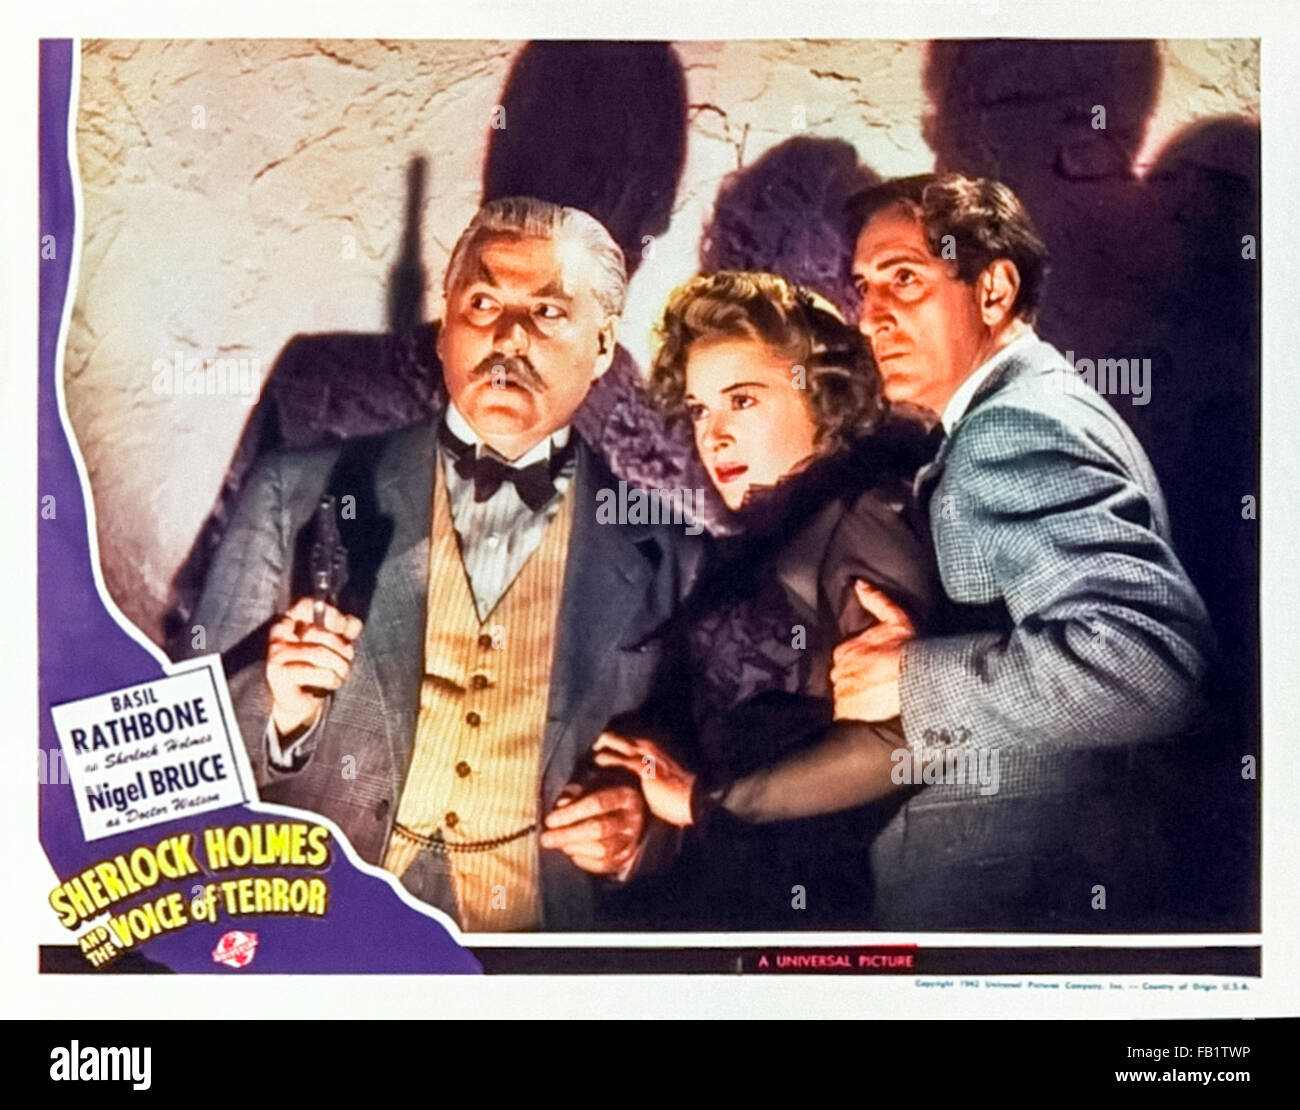 Lobby card for 'Sherlock Holmes and the Voice of Terror' 1942  film directed by John Rawlins and starring Basil Rathbone (Holmes); Nigel Bruce (Watson) and Evelyn Ankers (Kitty). See description for more information. Stock Photo